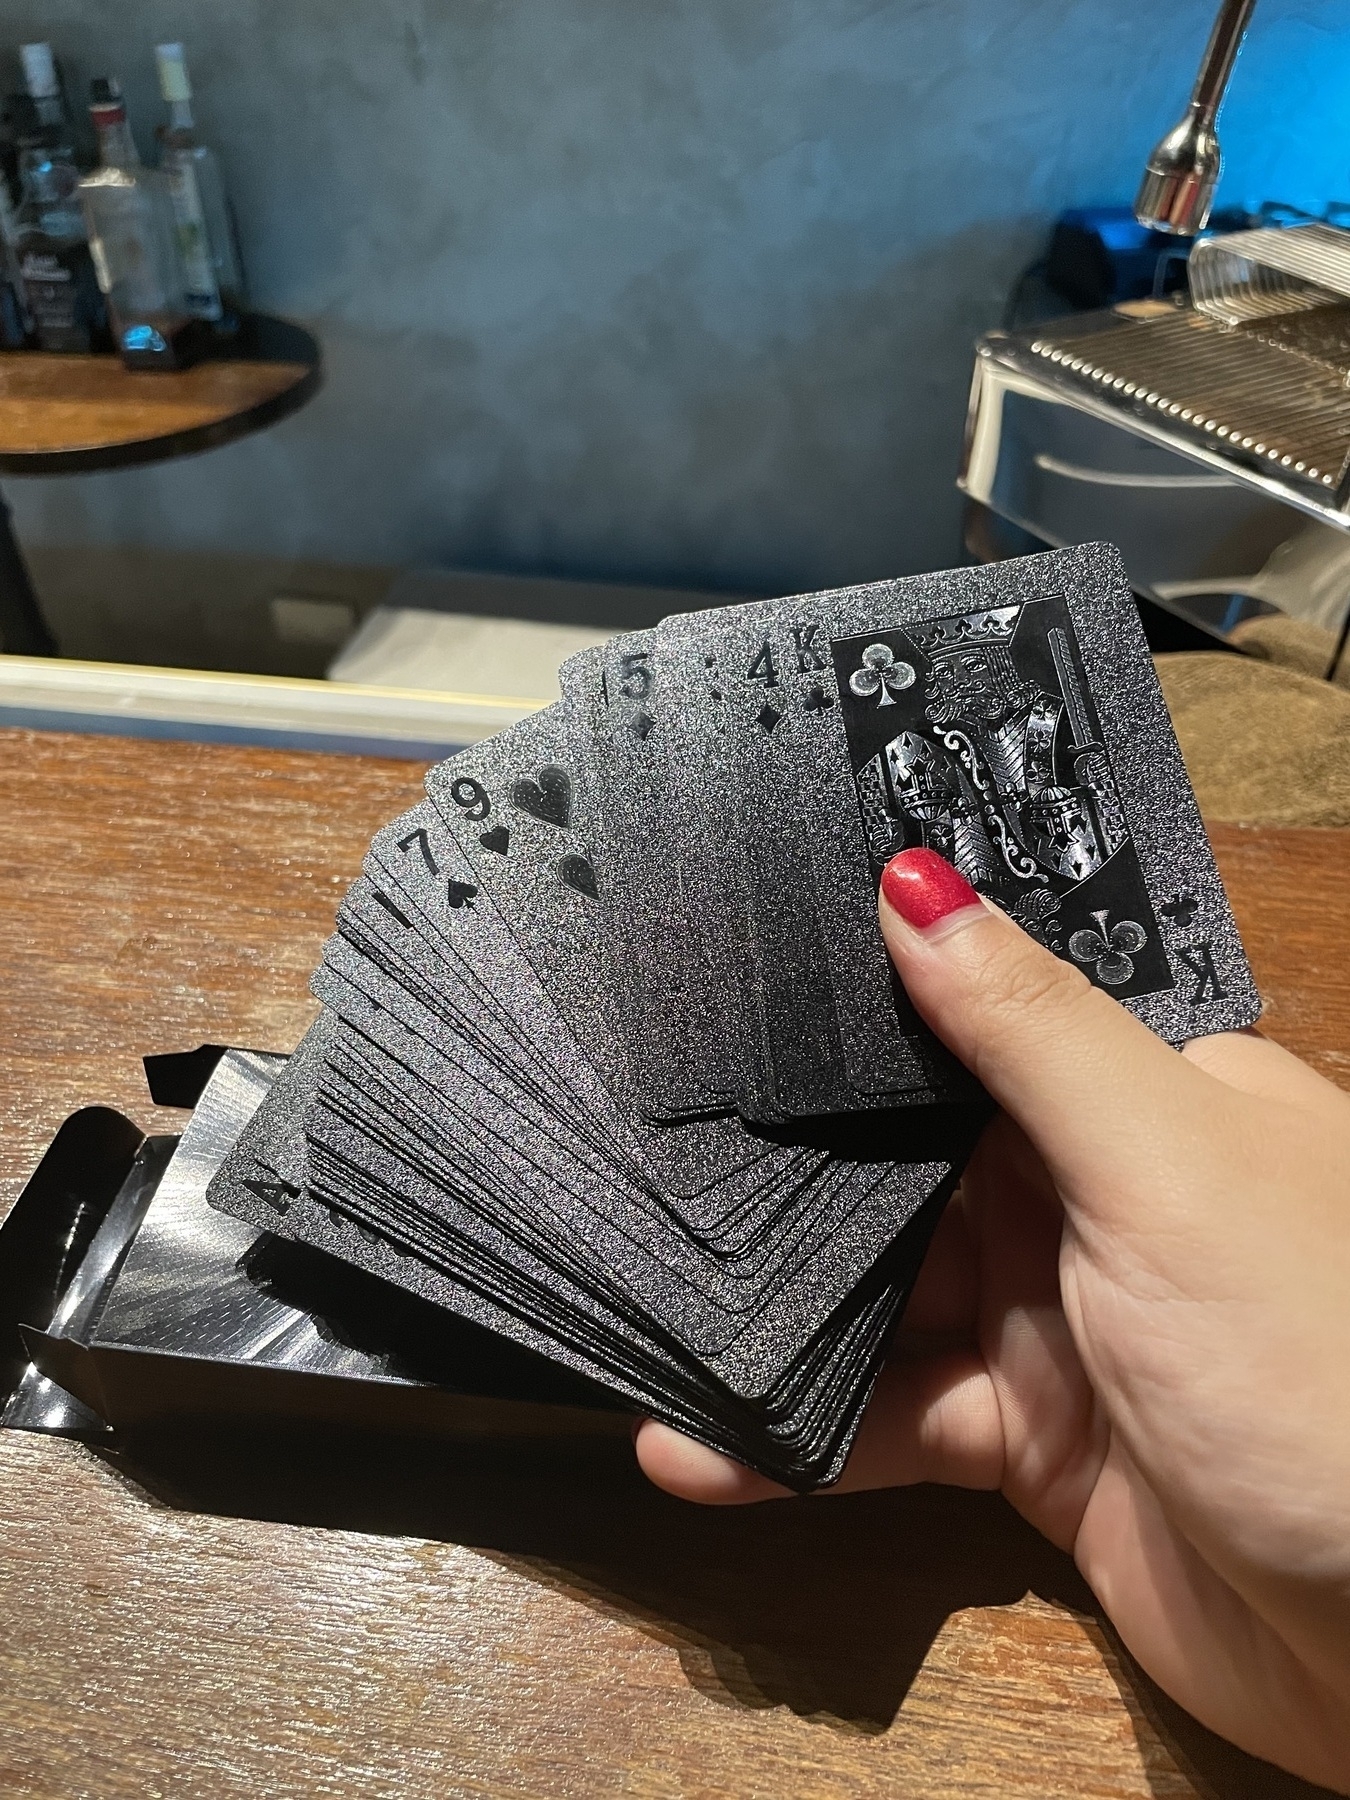 Chi is holding a deck of cards partially fanned out in her right hand. The cards themselves have a sheen texture, with the faces or symbols of each of the playing cards just a darker black to make it obvious when light shines on the surface of the card.